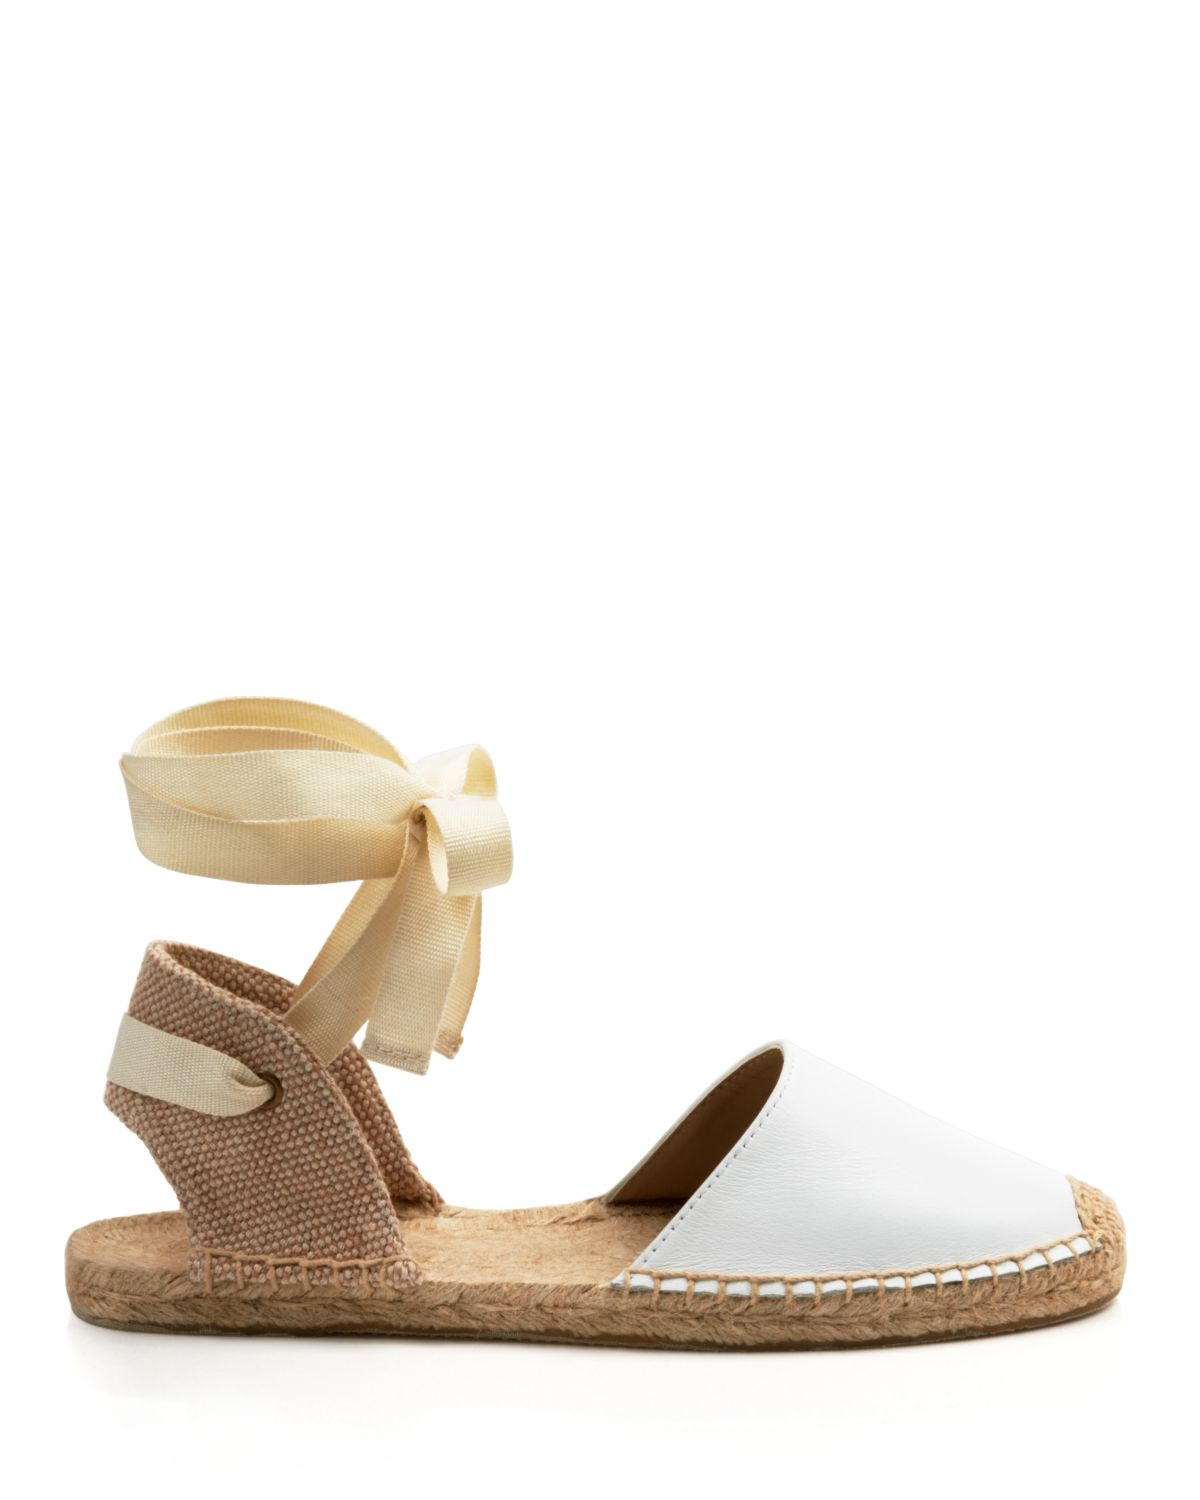 Lyst - Soludos Espadrille Flat Sandals - Classic Ankle Wrap in White